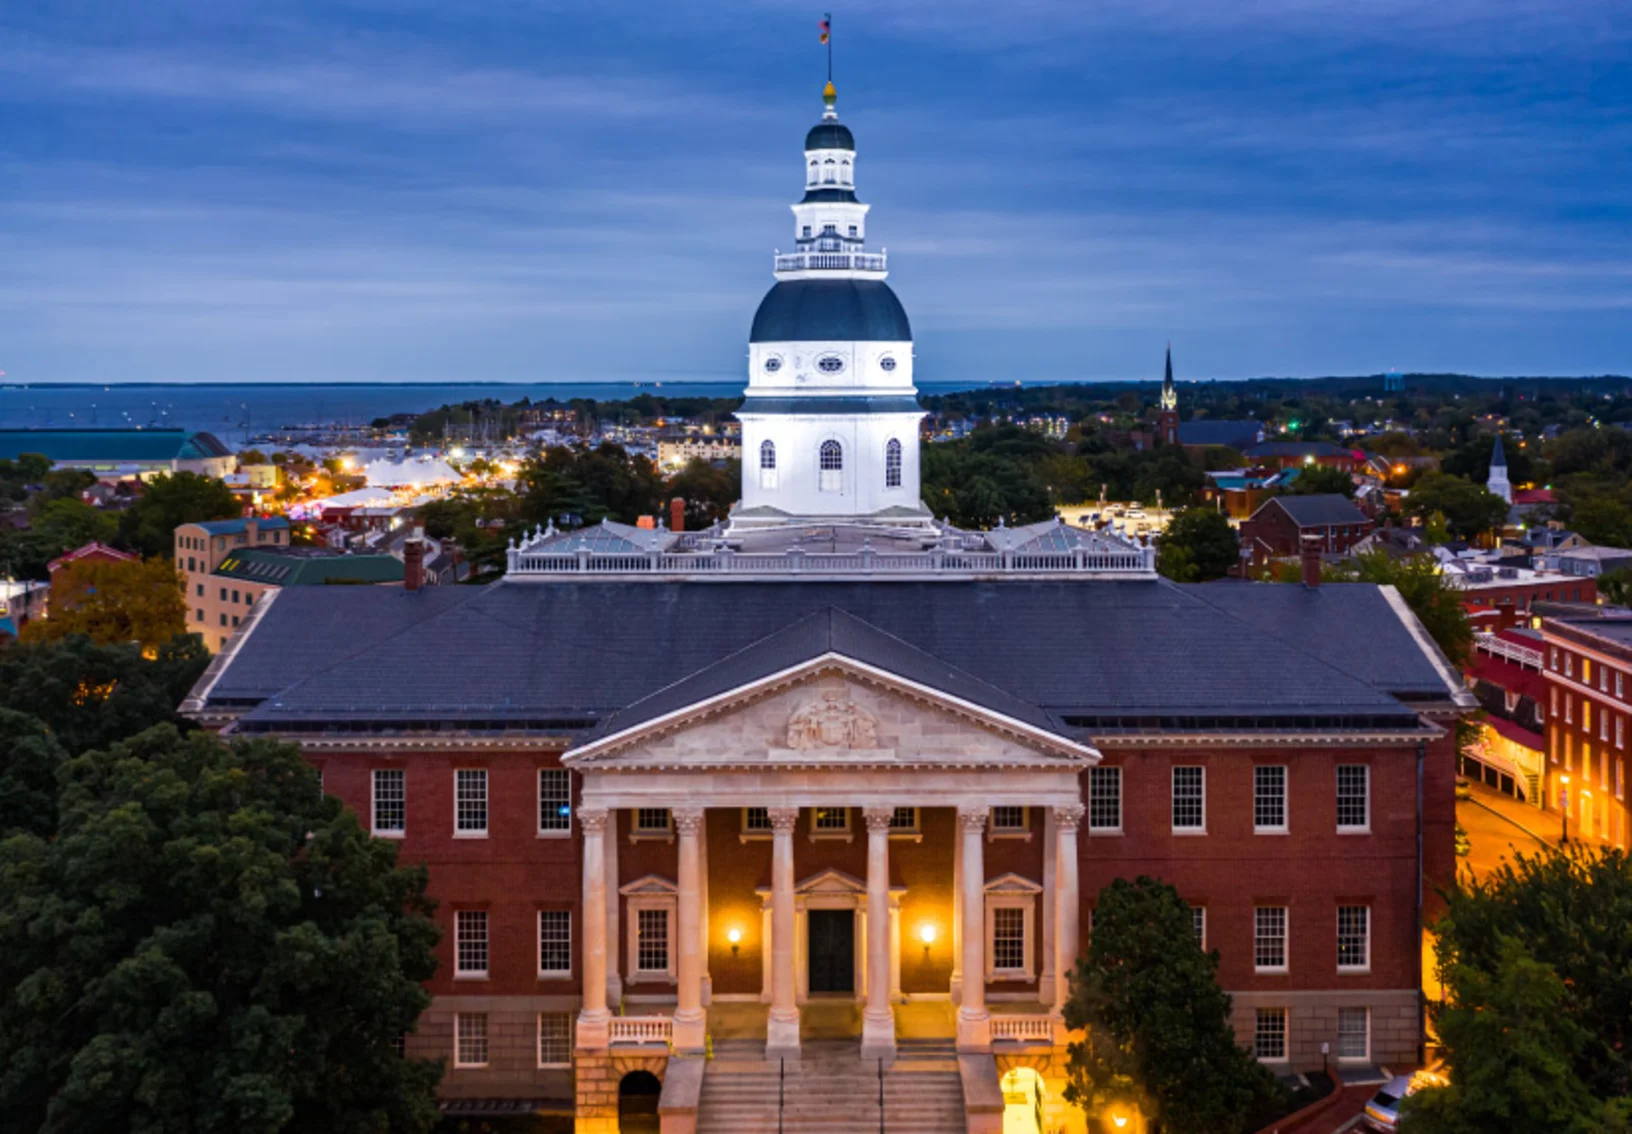 Capital building in Annapolis, MD